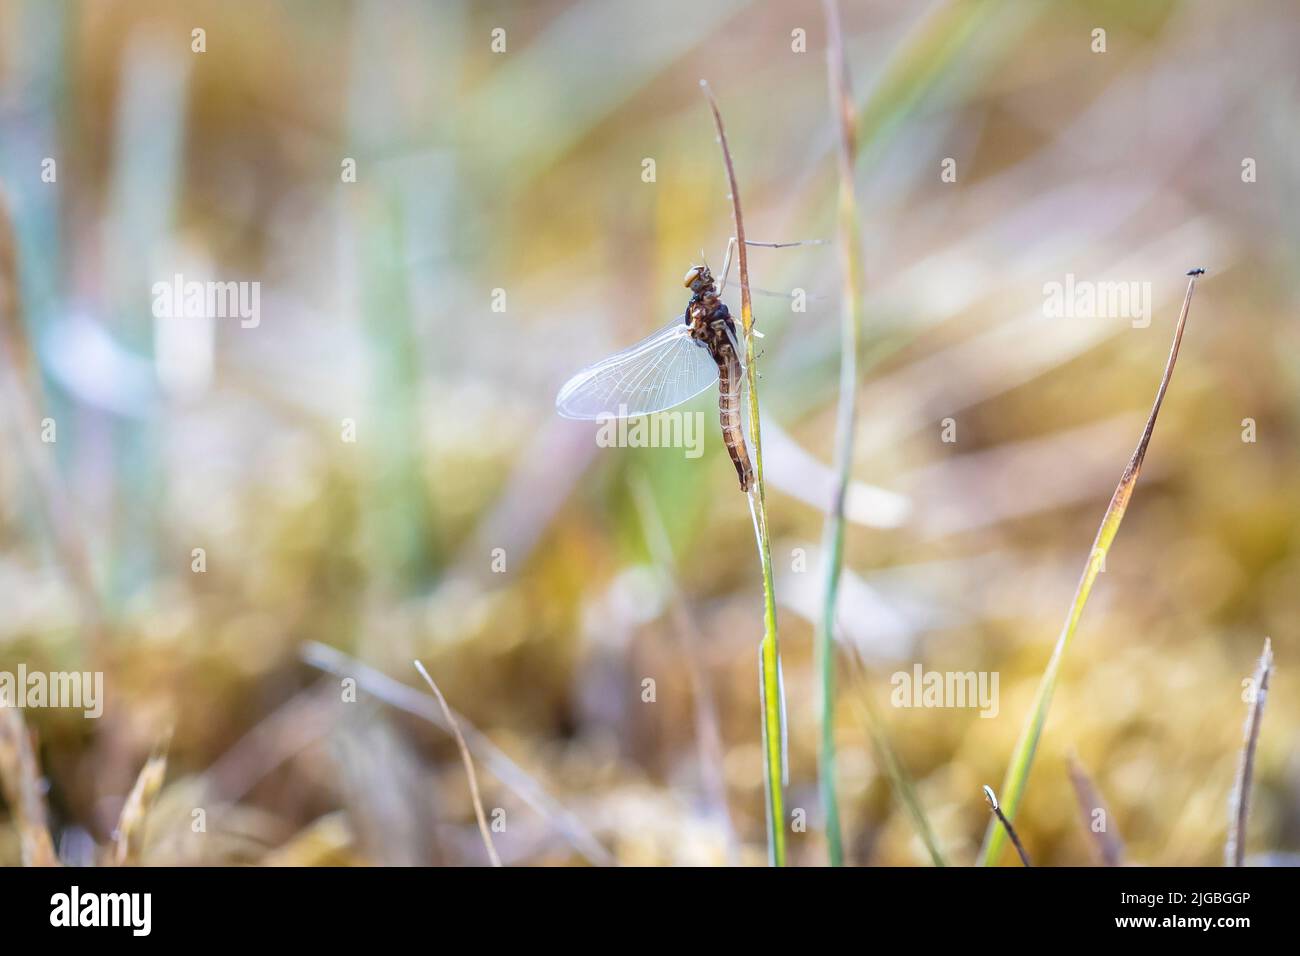 A leptophlebia vespertina mayfly resting in grass, natural colors, low point of view Stock Photo